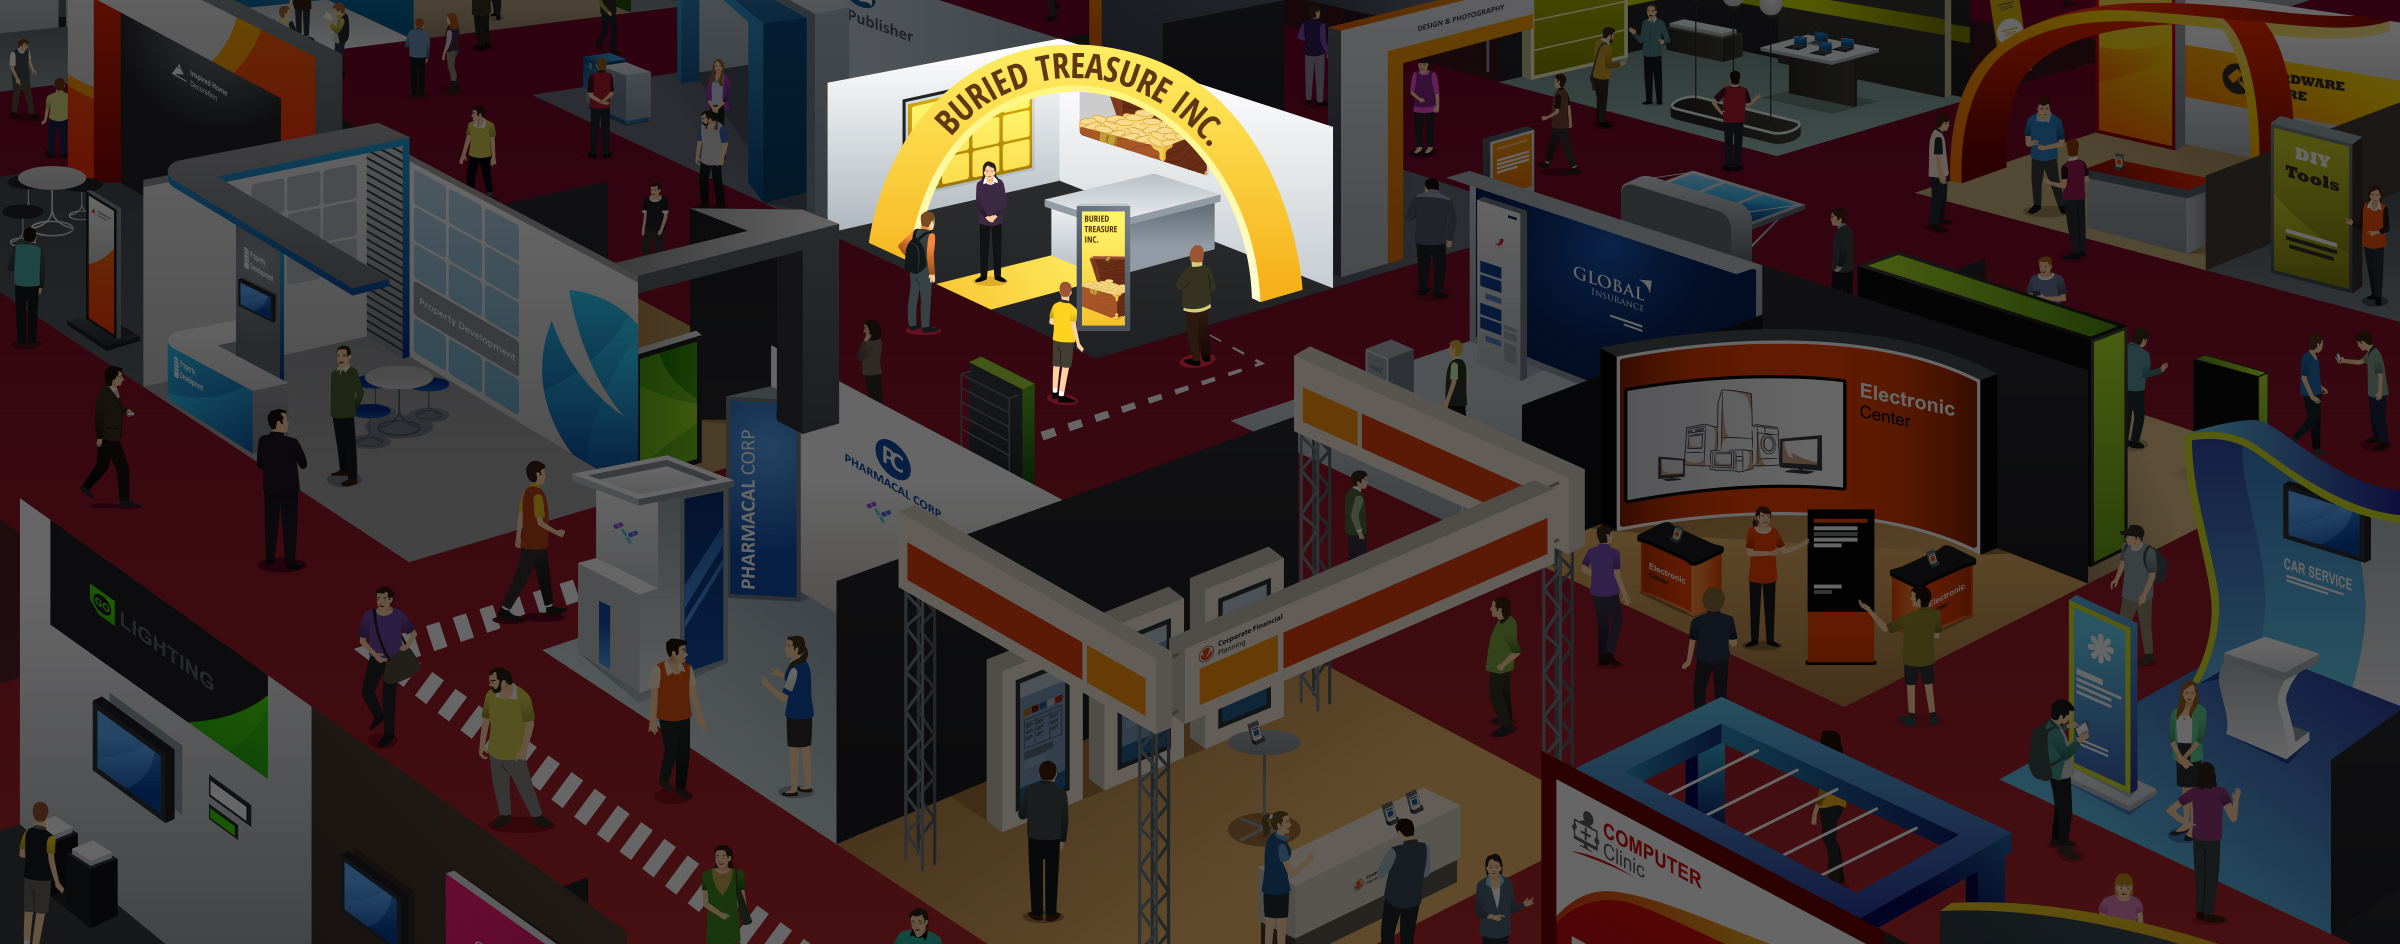 Finding hidden value in trade shows